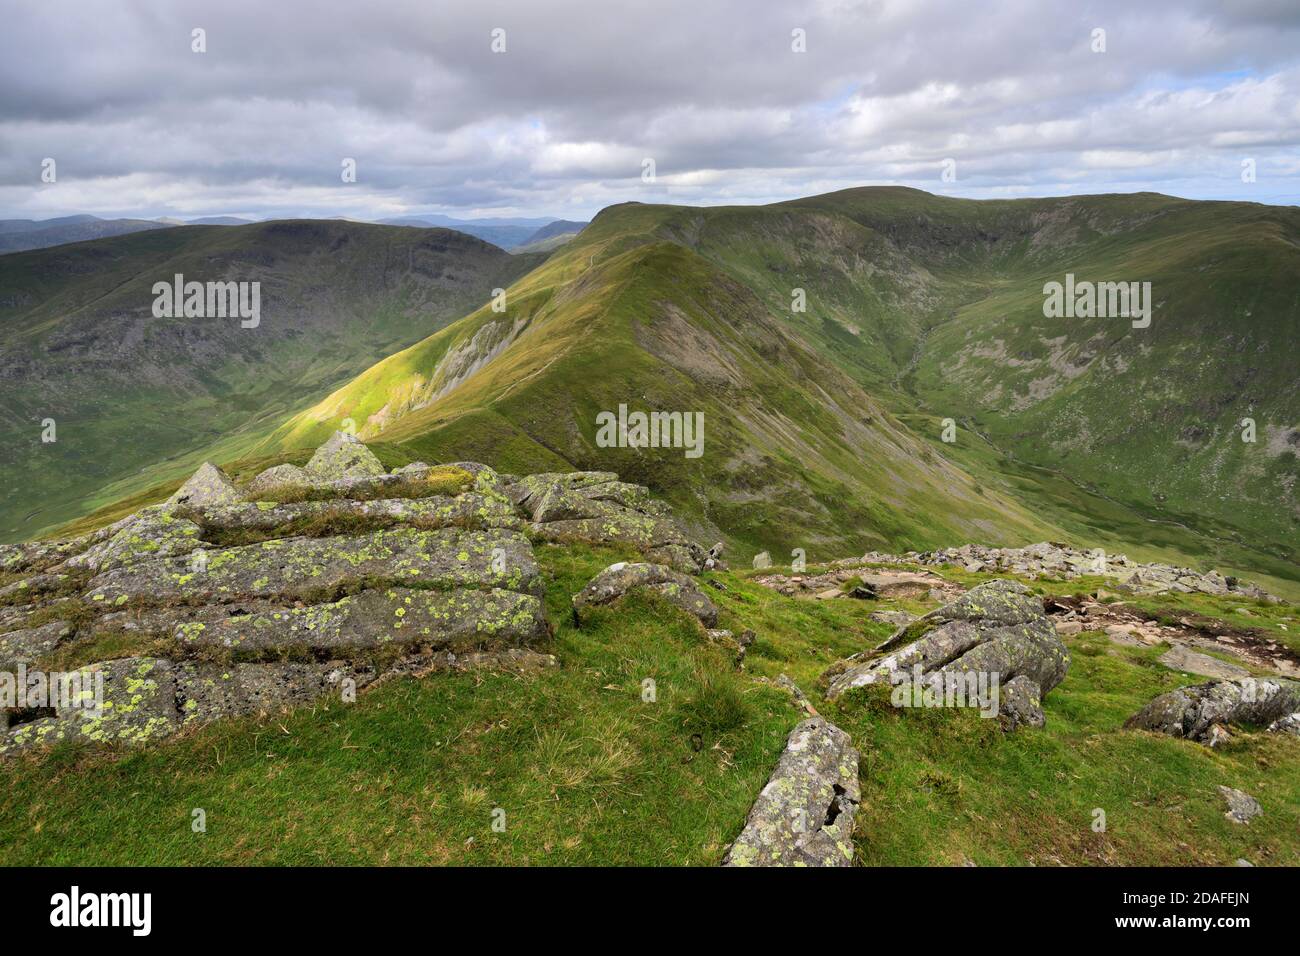 View of the Fells surrounding the Kentmere Common, Kirkstone pass, Lake District National Park, Cumbria, England, UK Stock Photo